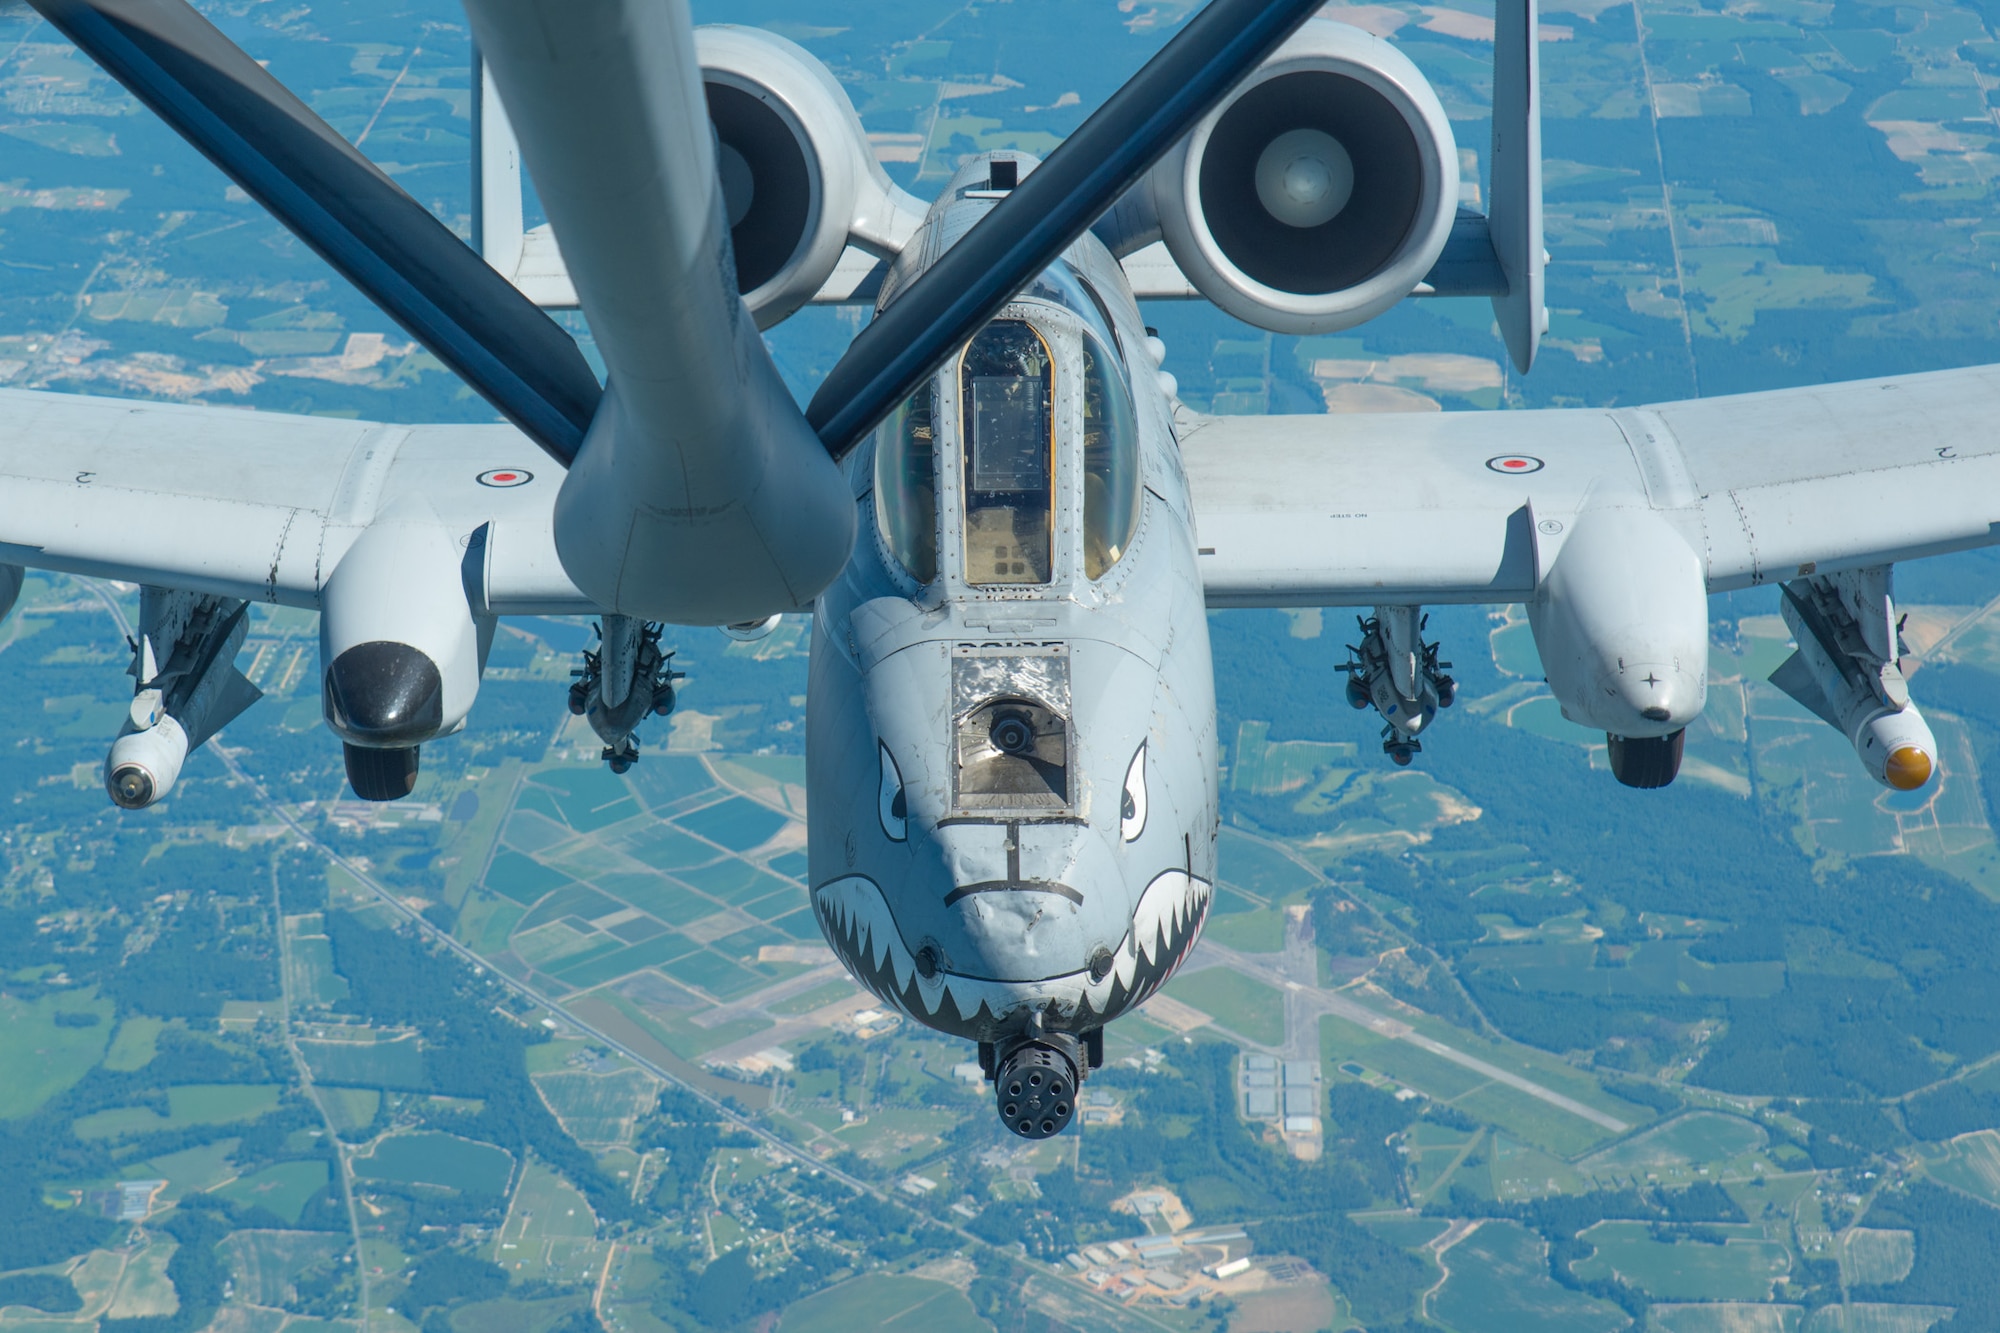 An A-10C from the 476th Fighter Group at Moody AFB, Ga approaches the boom from a KC-135 Stratotanker during refueling operations over Georgia on July 14, 2016. (U.S. Air Force photo by Master Sgt. Eric J. Amidon)